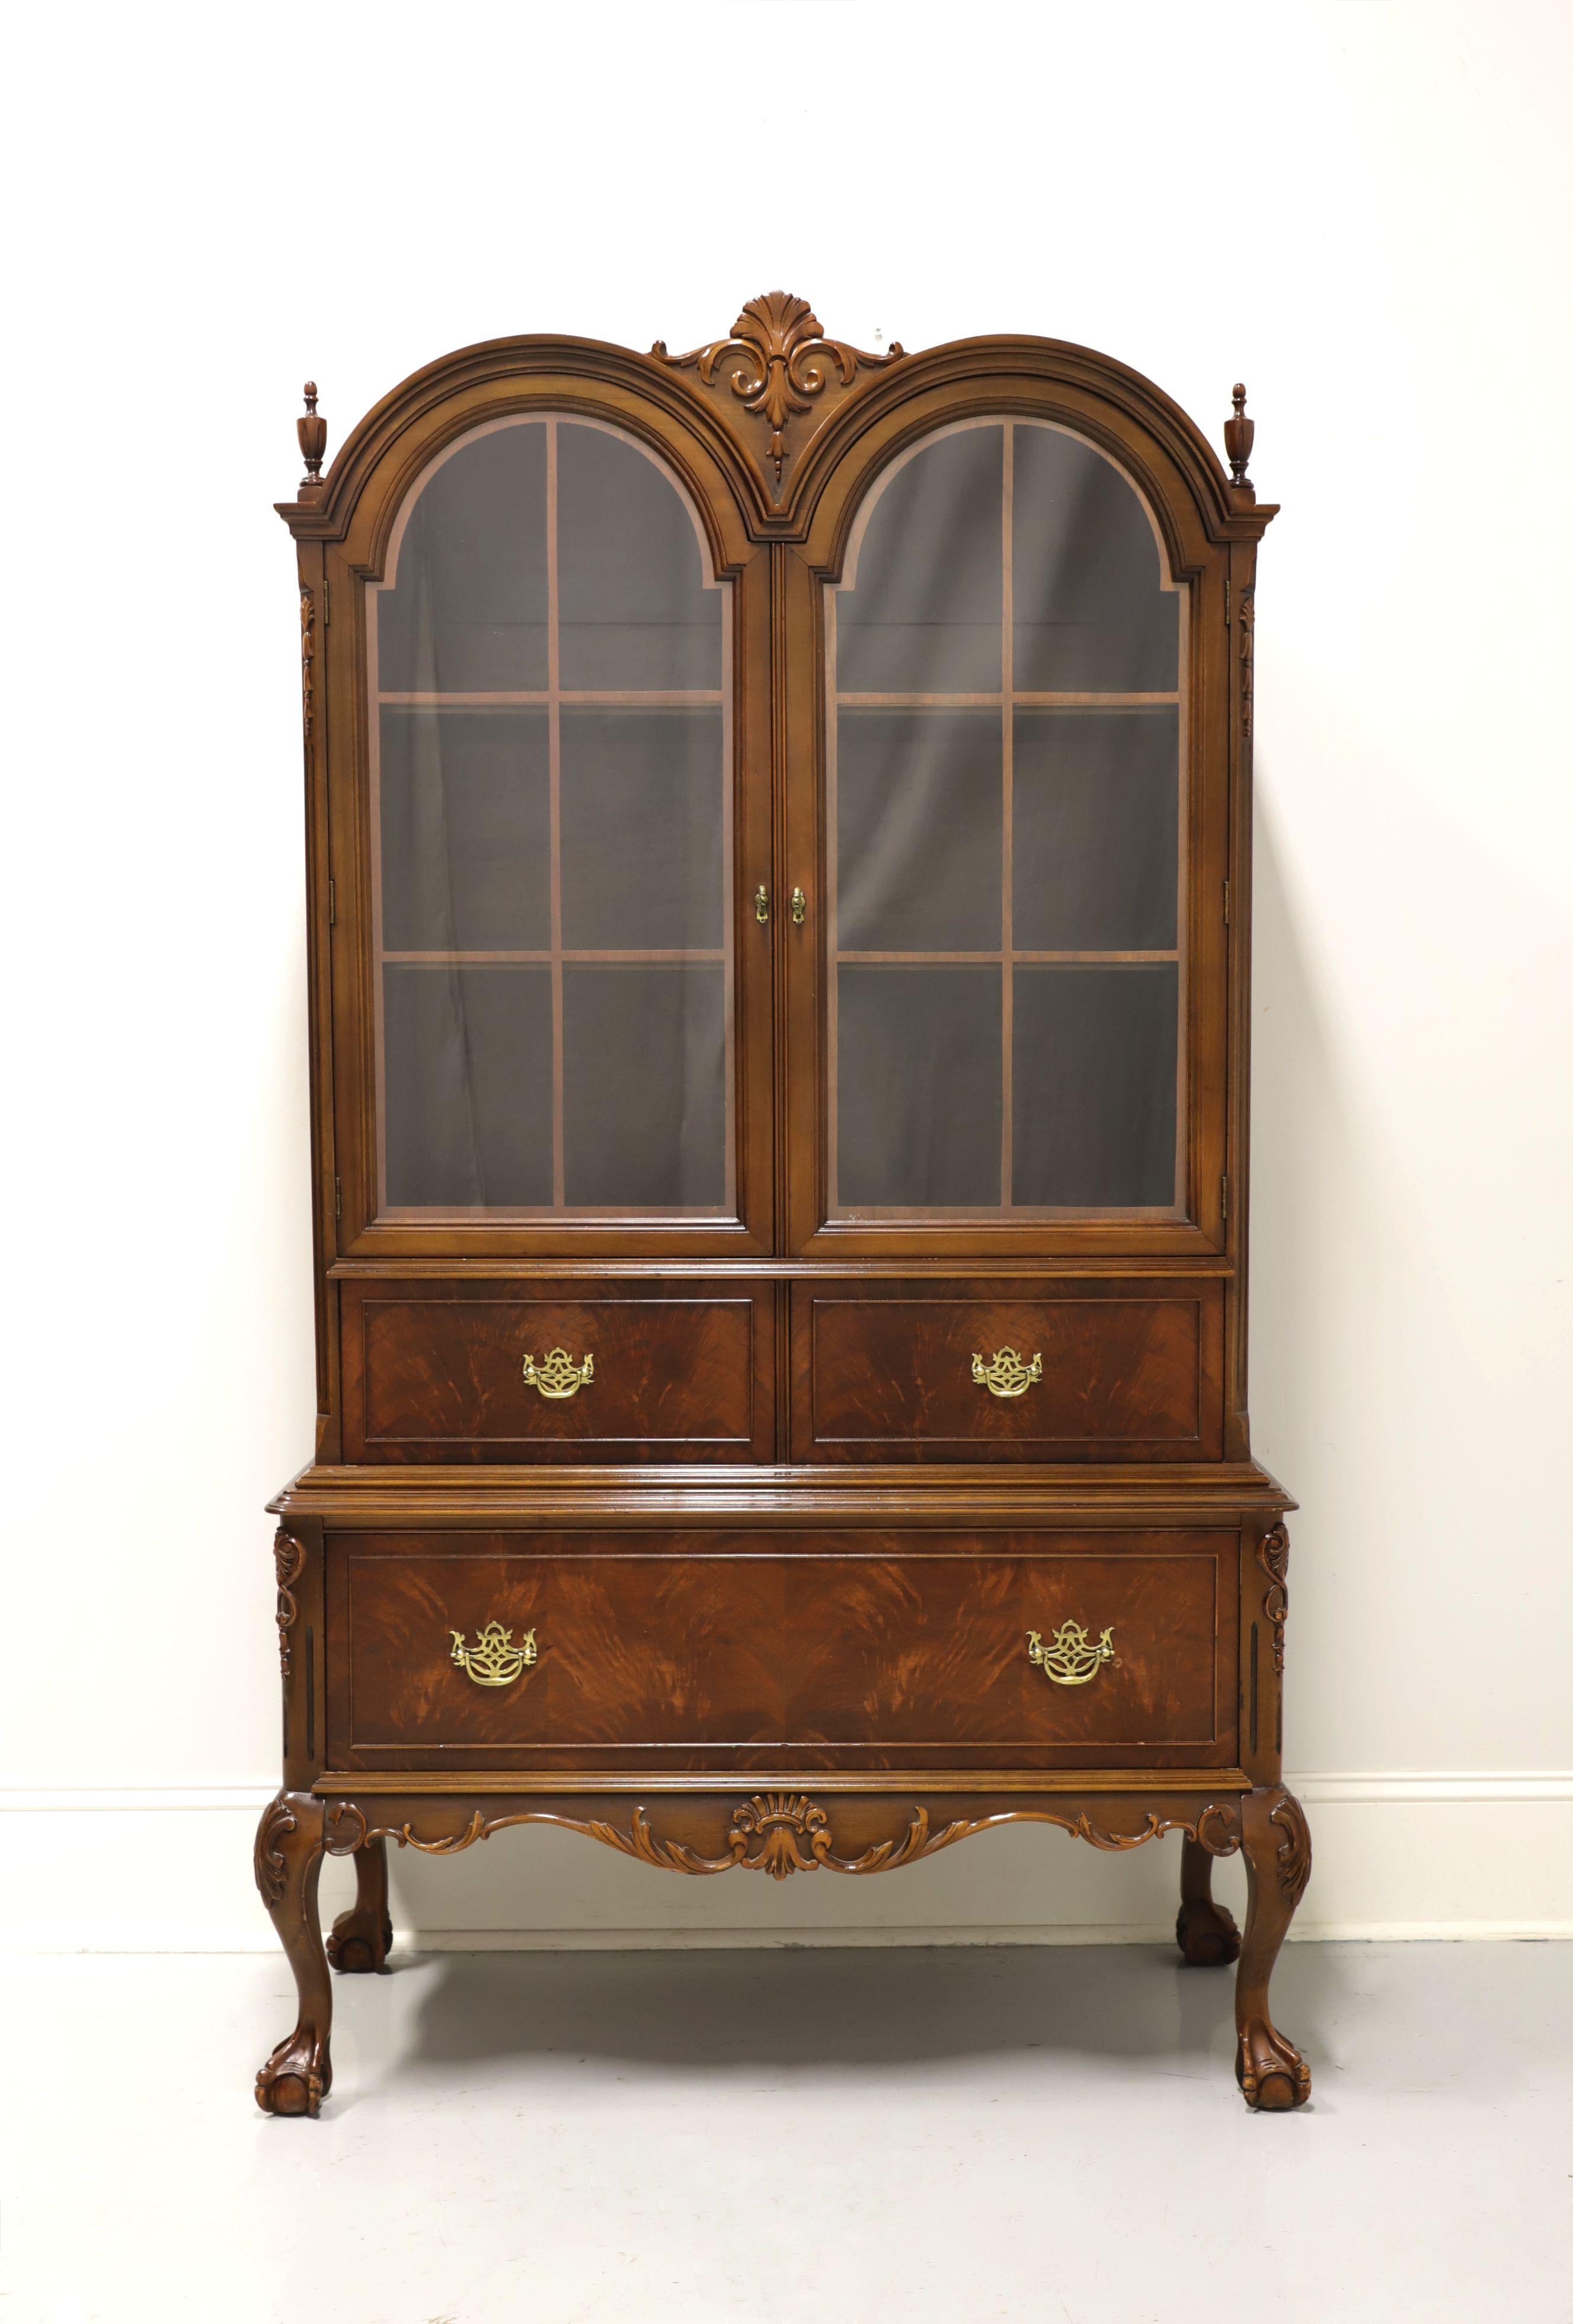 A Chippendale style display cabinet by Lammert's Furniture, of Saint Louis, Missouri, USA. Mahogany with brass hardware, double bonnet top with decorative center carving & finials, raised drawer fronts, carved knees and ball in claw feet. Upper